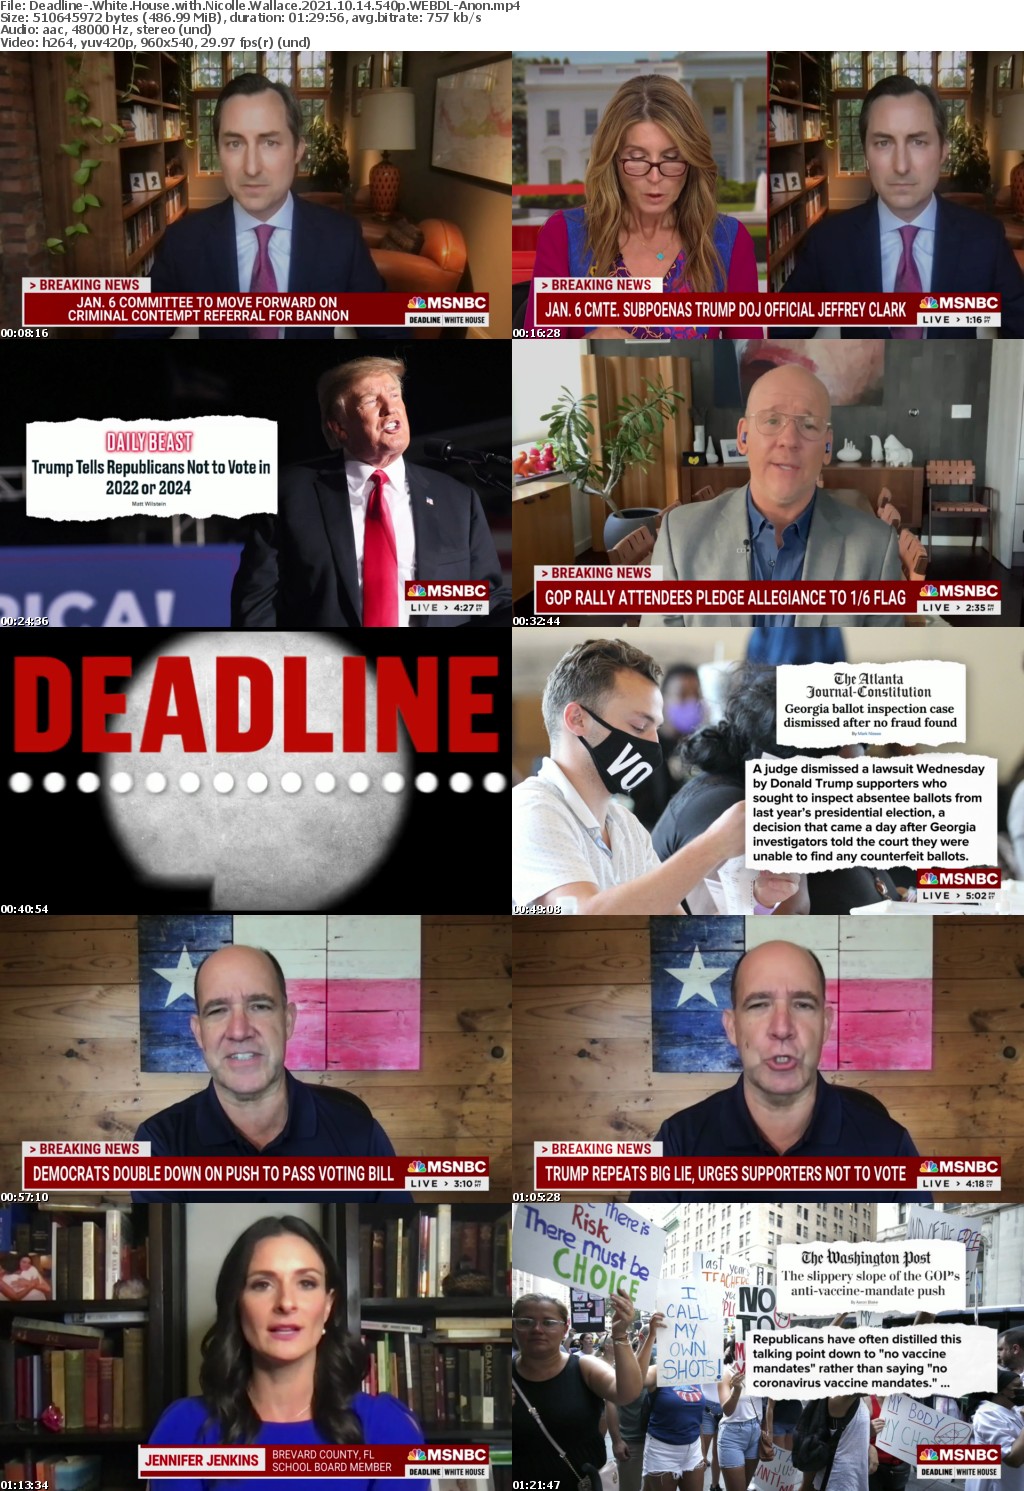 Deadline- White House with Nicolle Wallace 2021 10 14 540p WEBDL-Anon